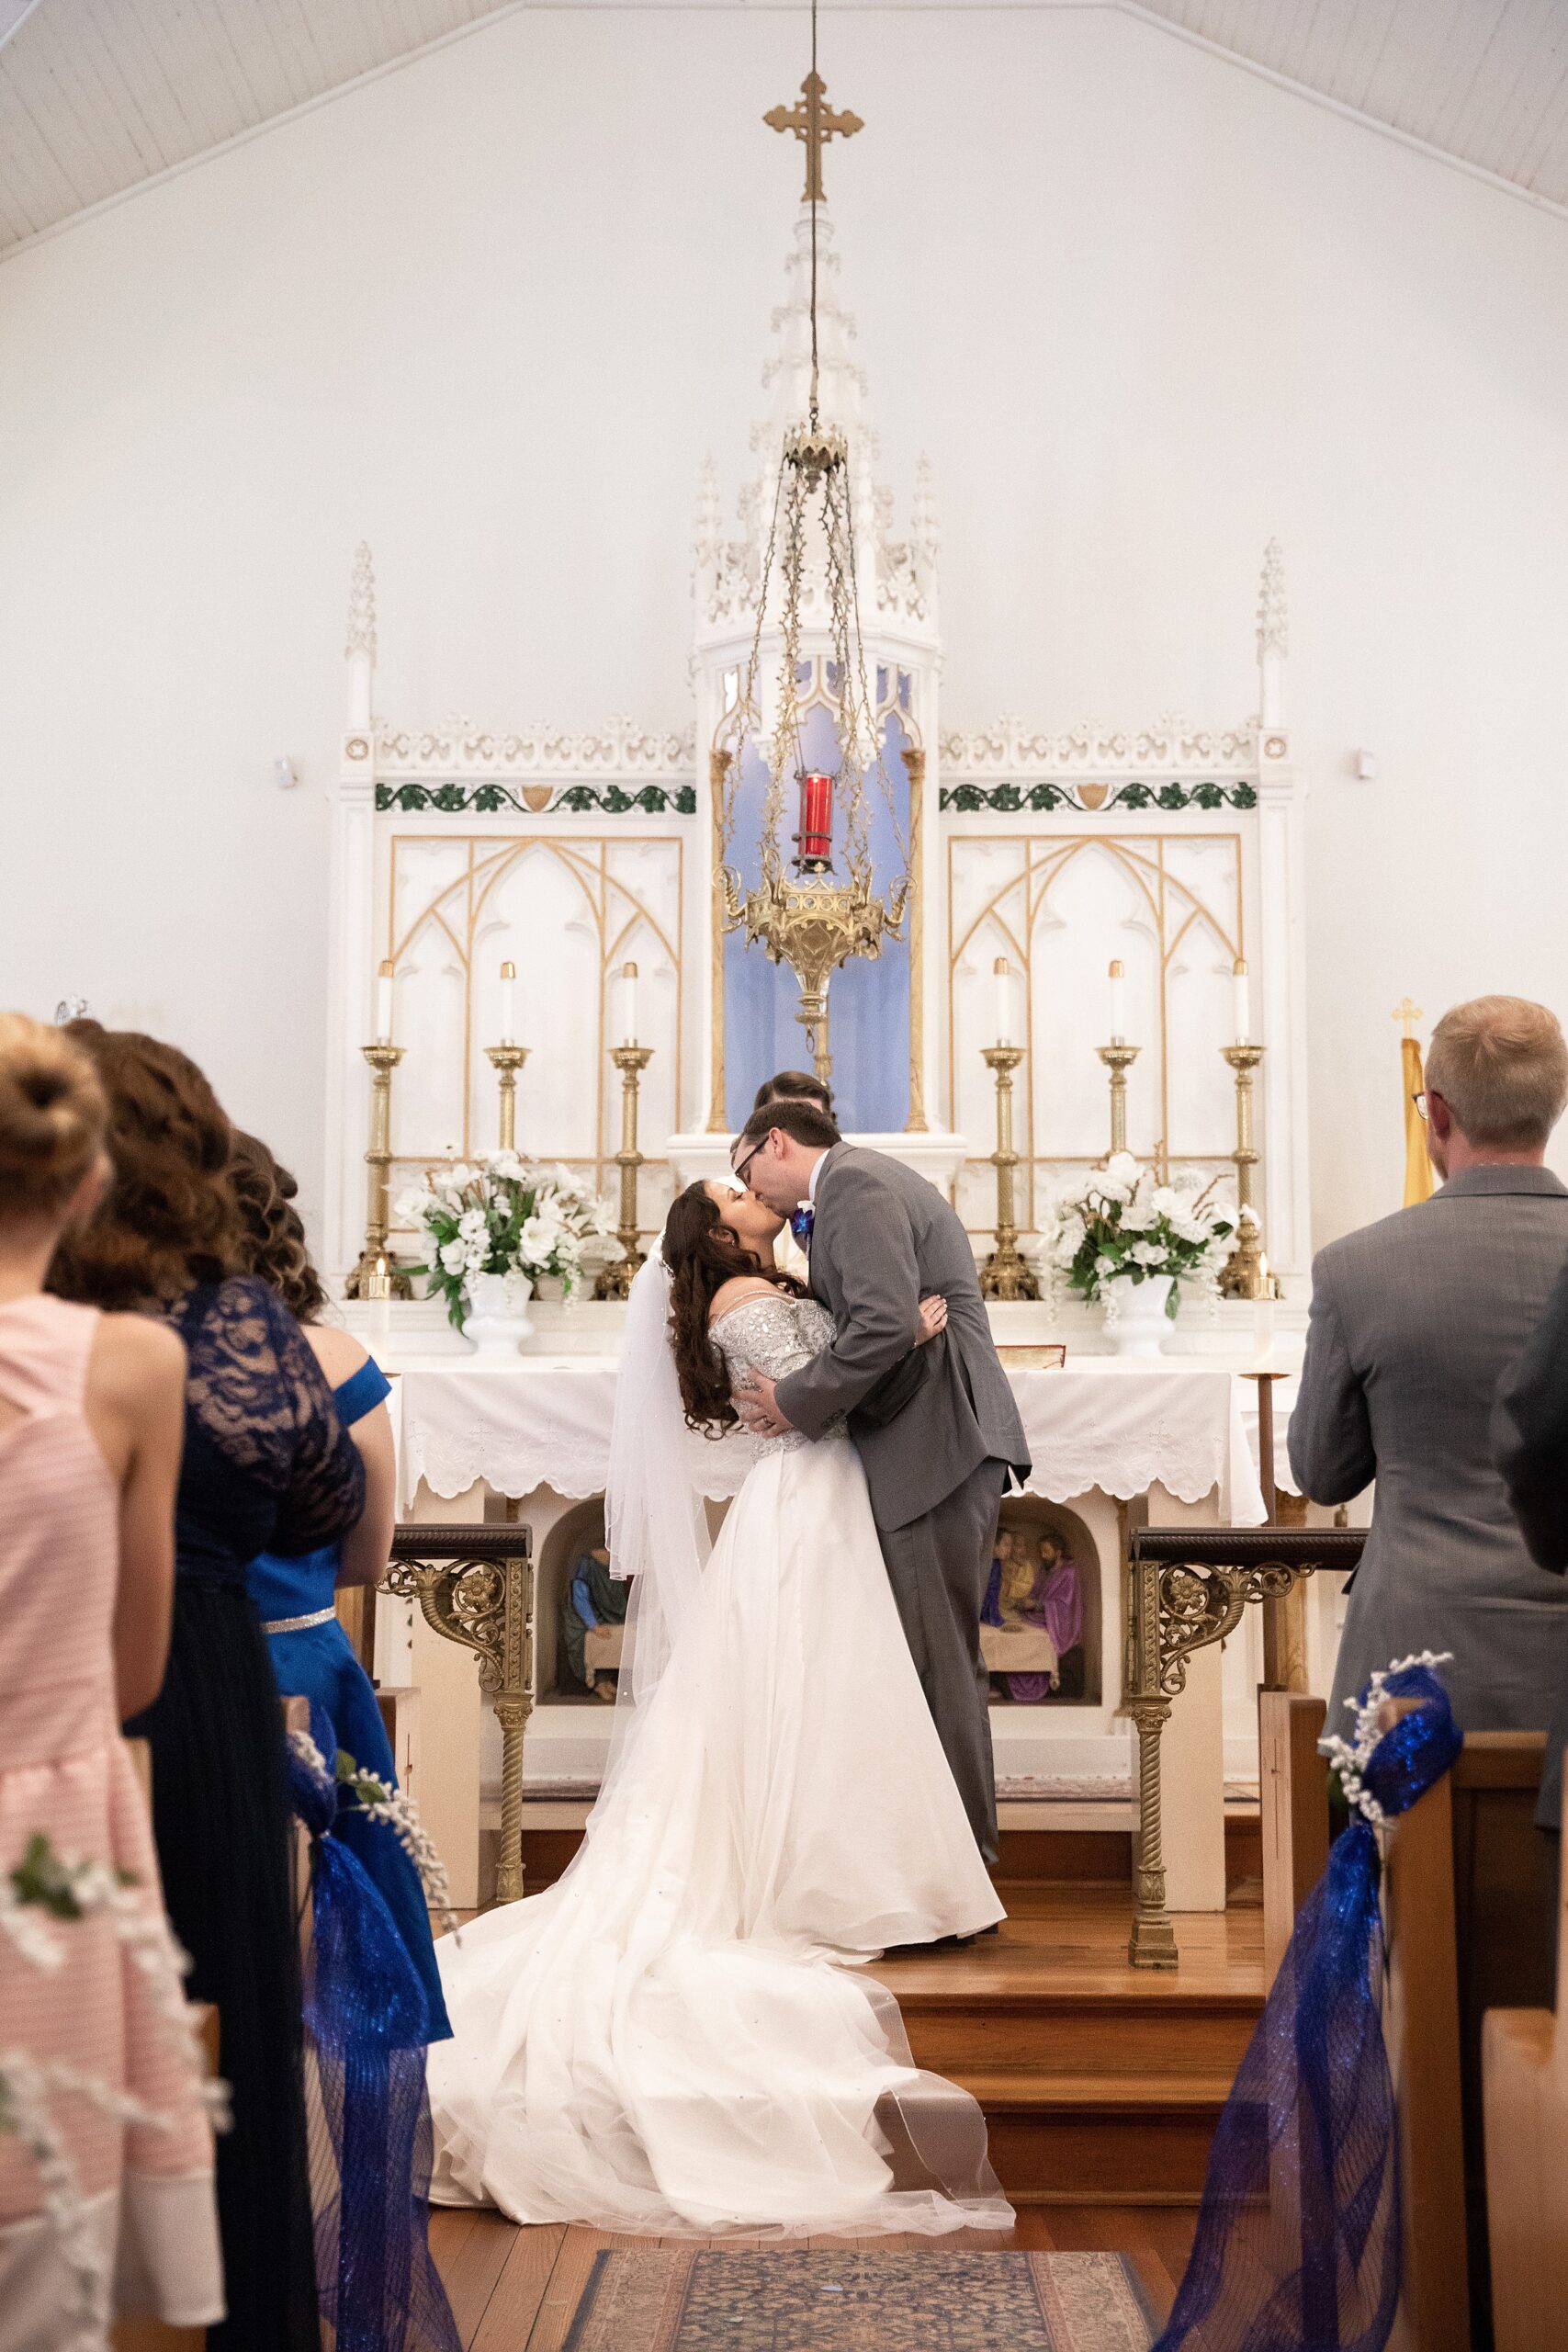 Newlyweds kiss at the altar of their wedding ceremony to applause from guests